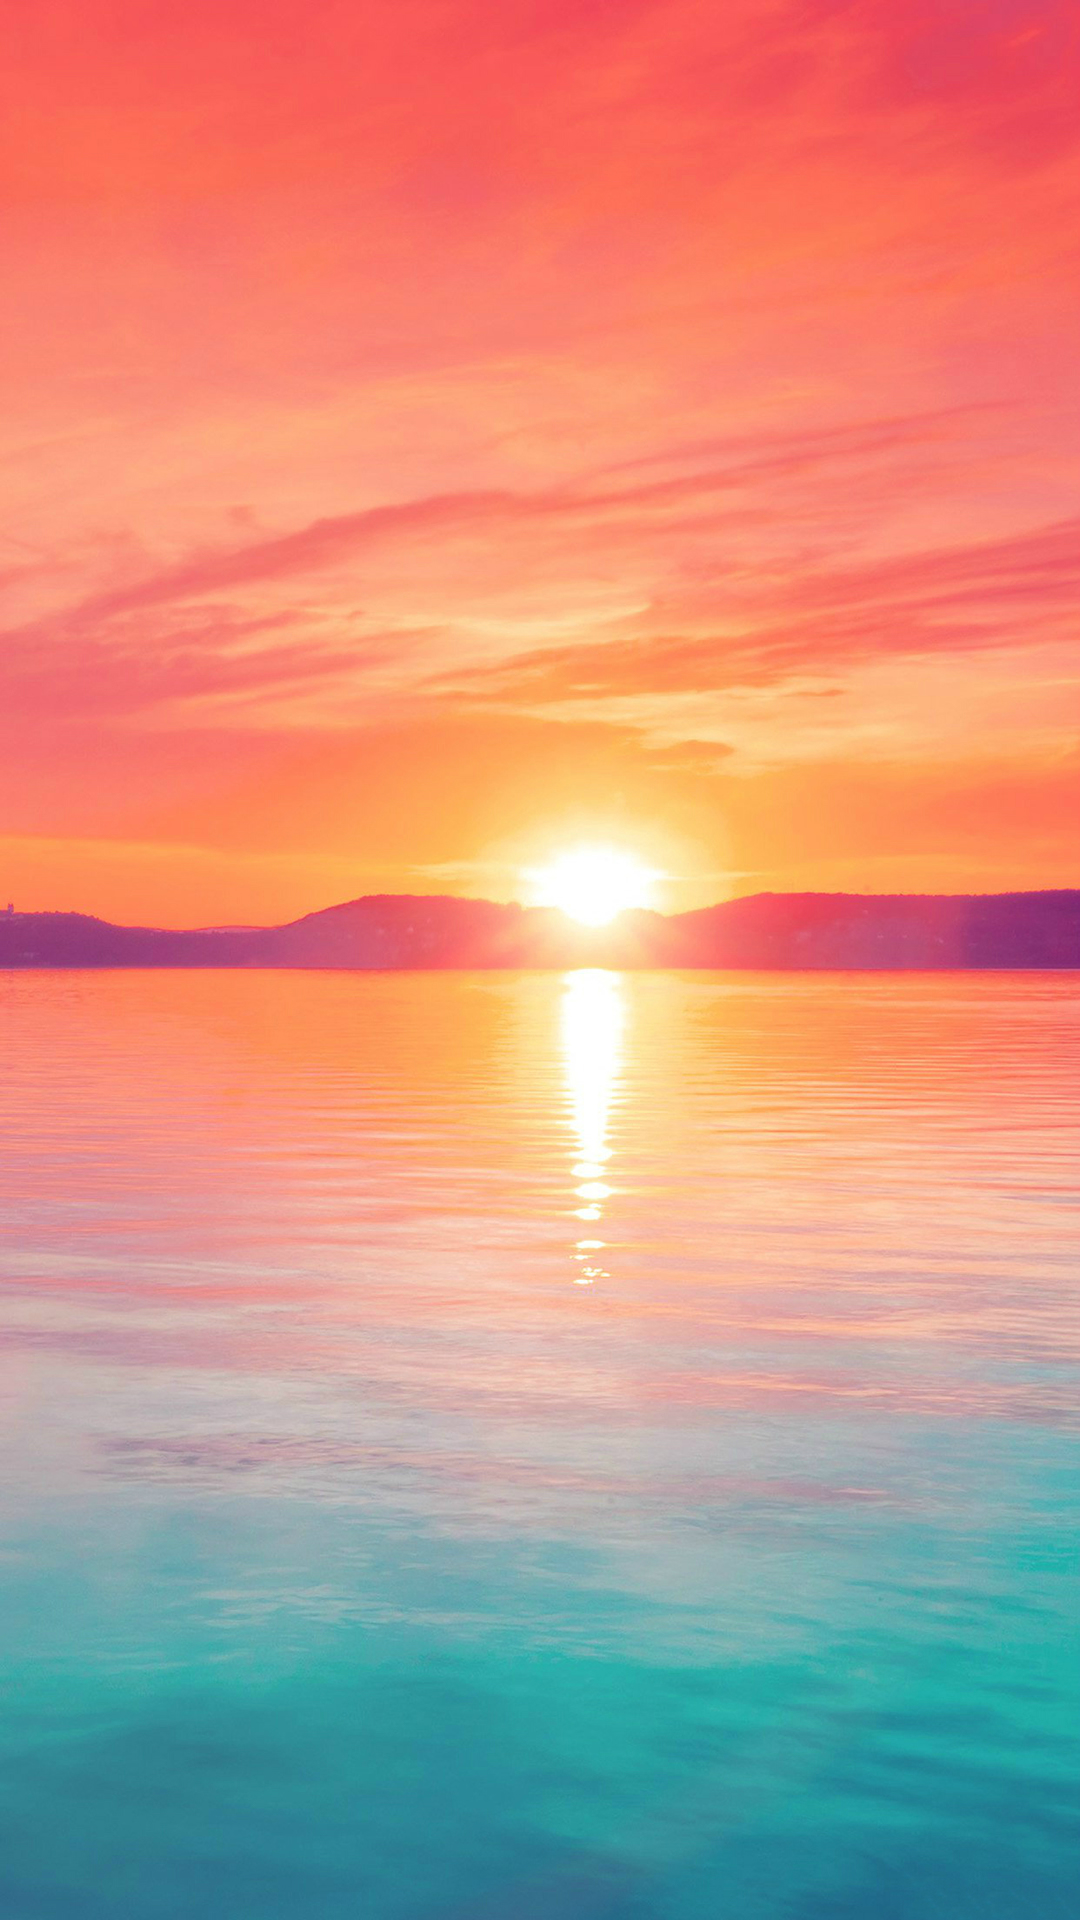 Sunset Night Lake Water Sky Red Flare iPhone 6 wallpaper